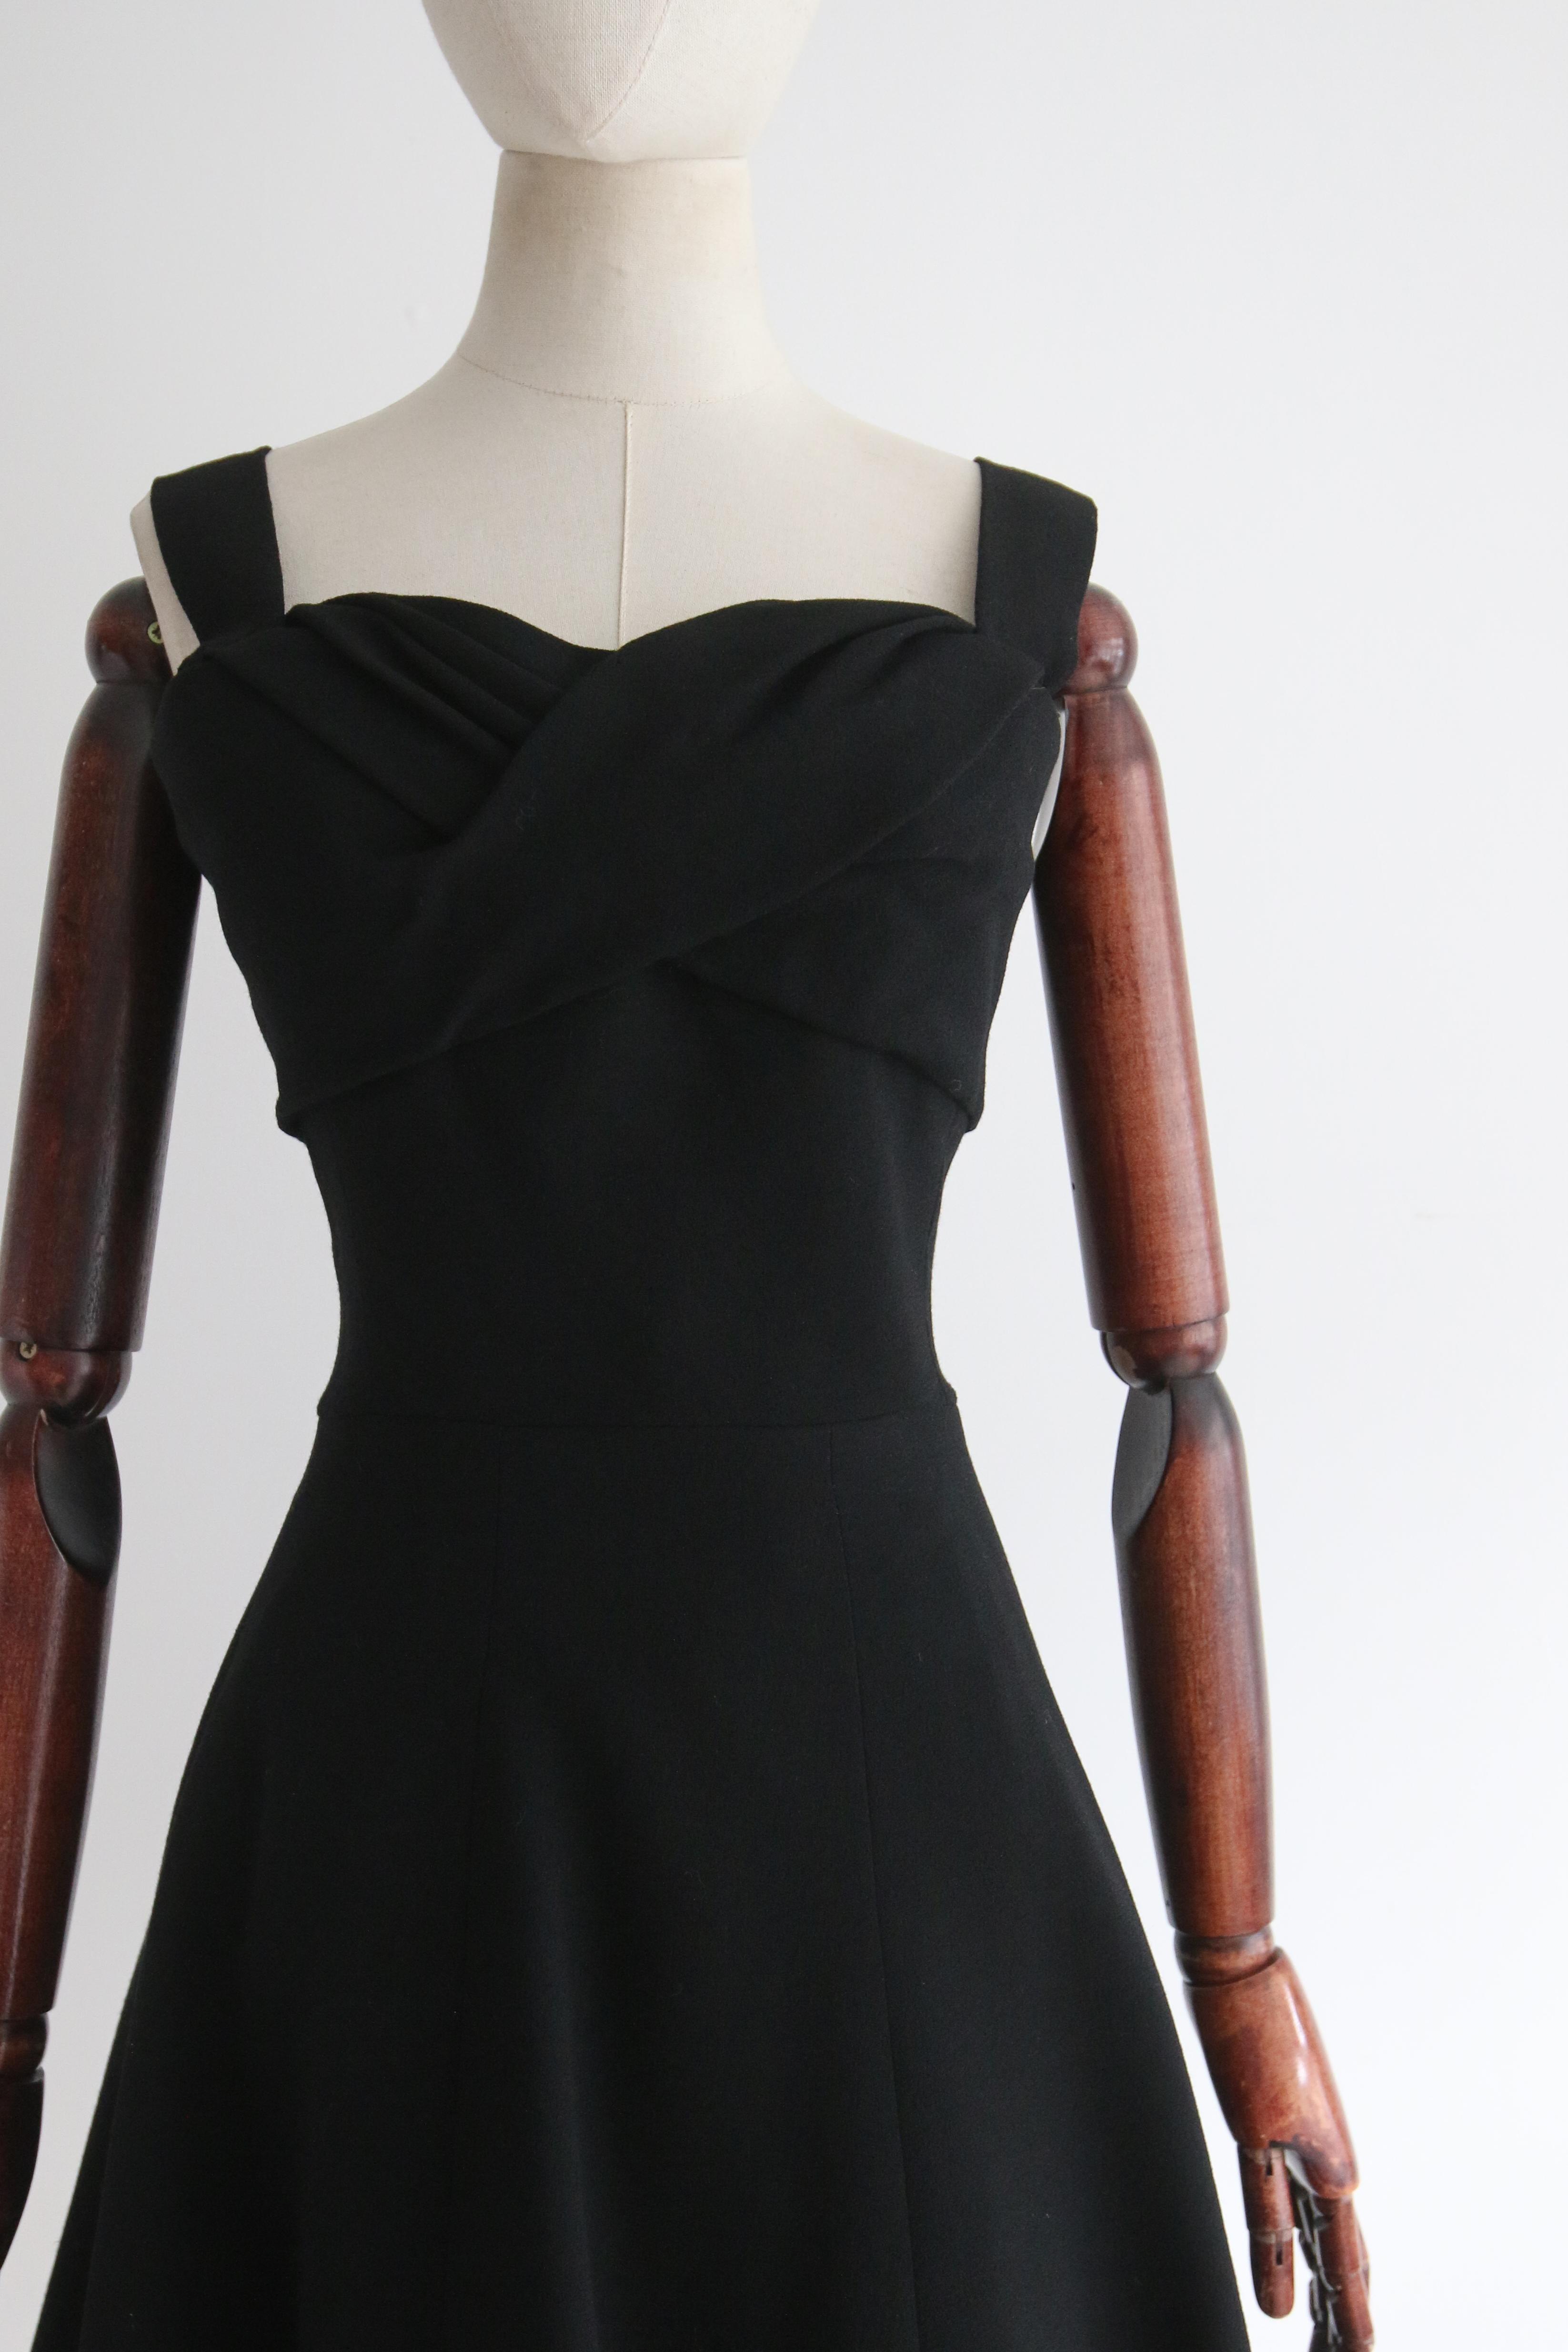  Vintage Late 1950's Black Christian Dior Dress UK 8 US 4 In Good Condition For Sale In Cheltenham, GB